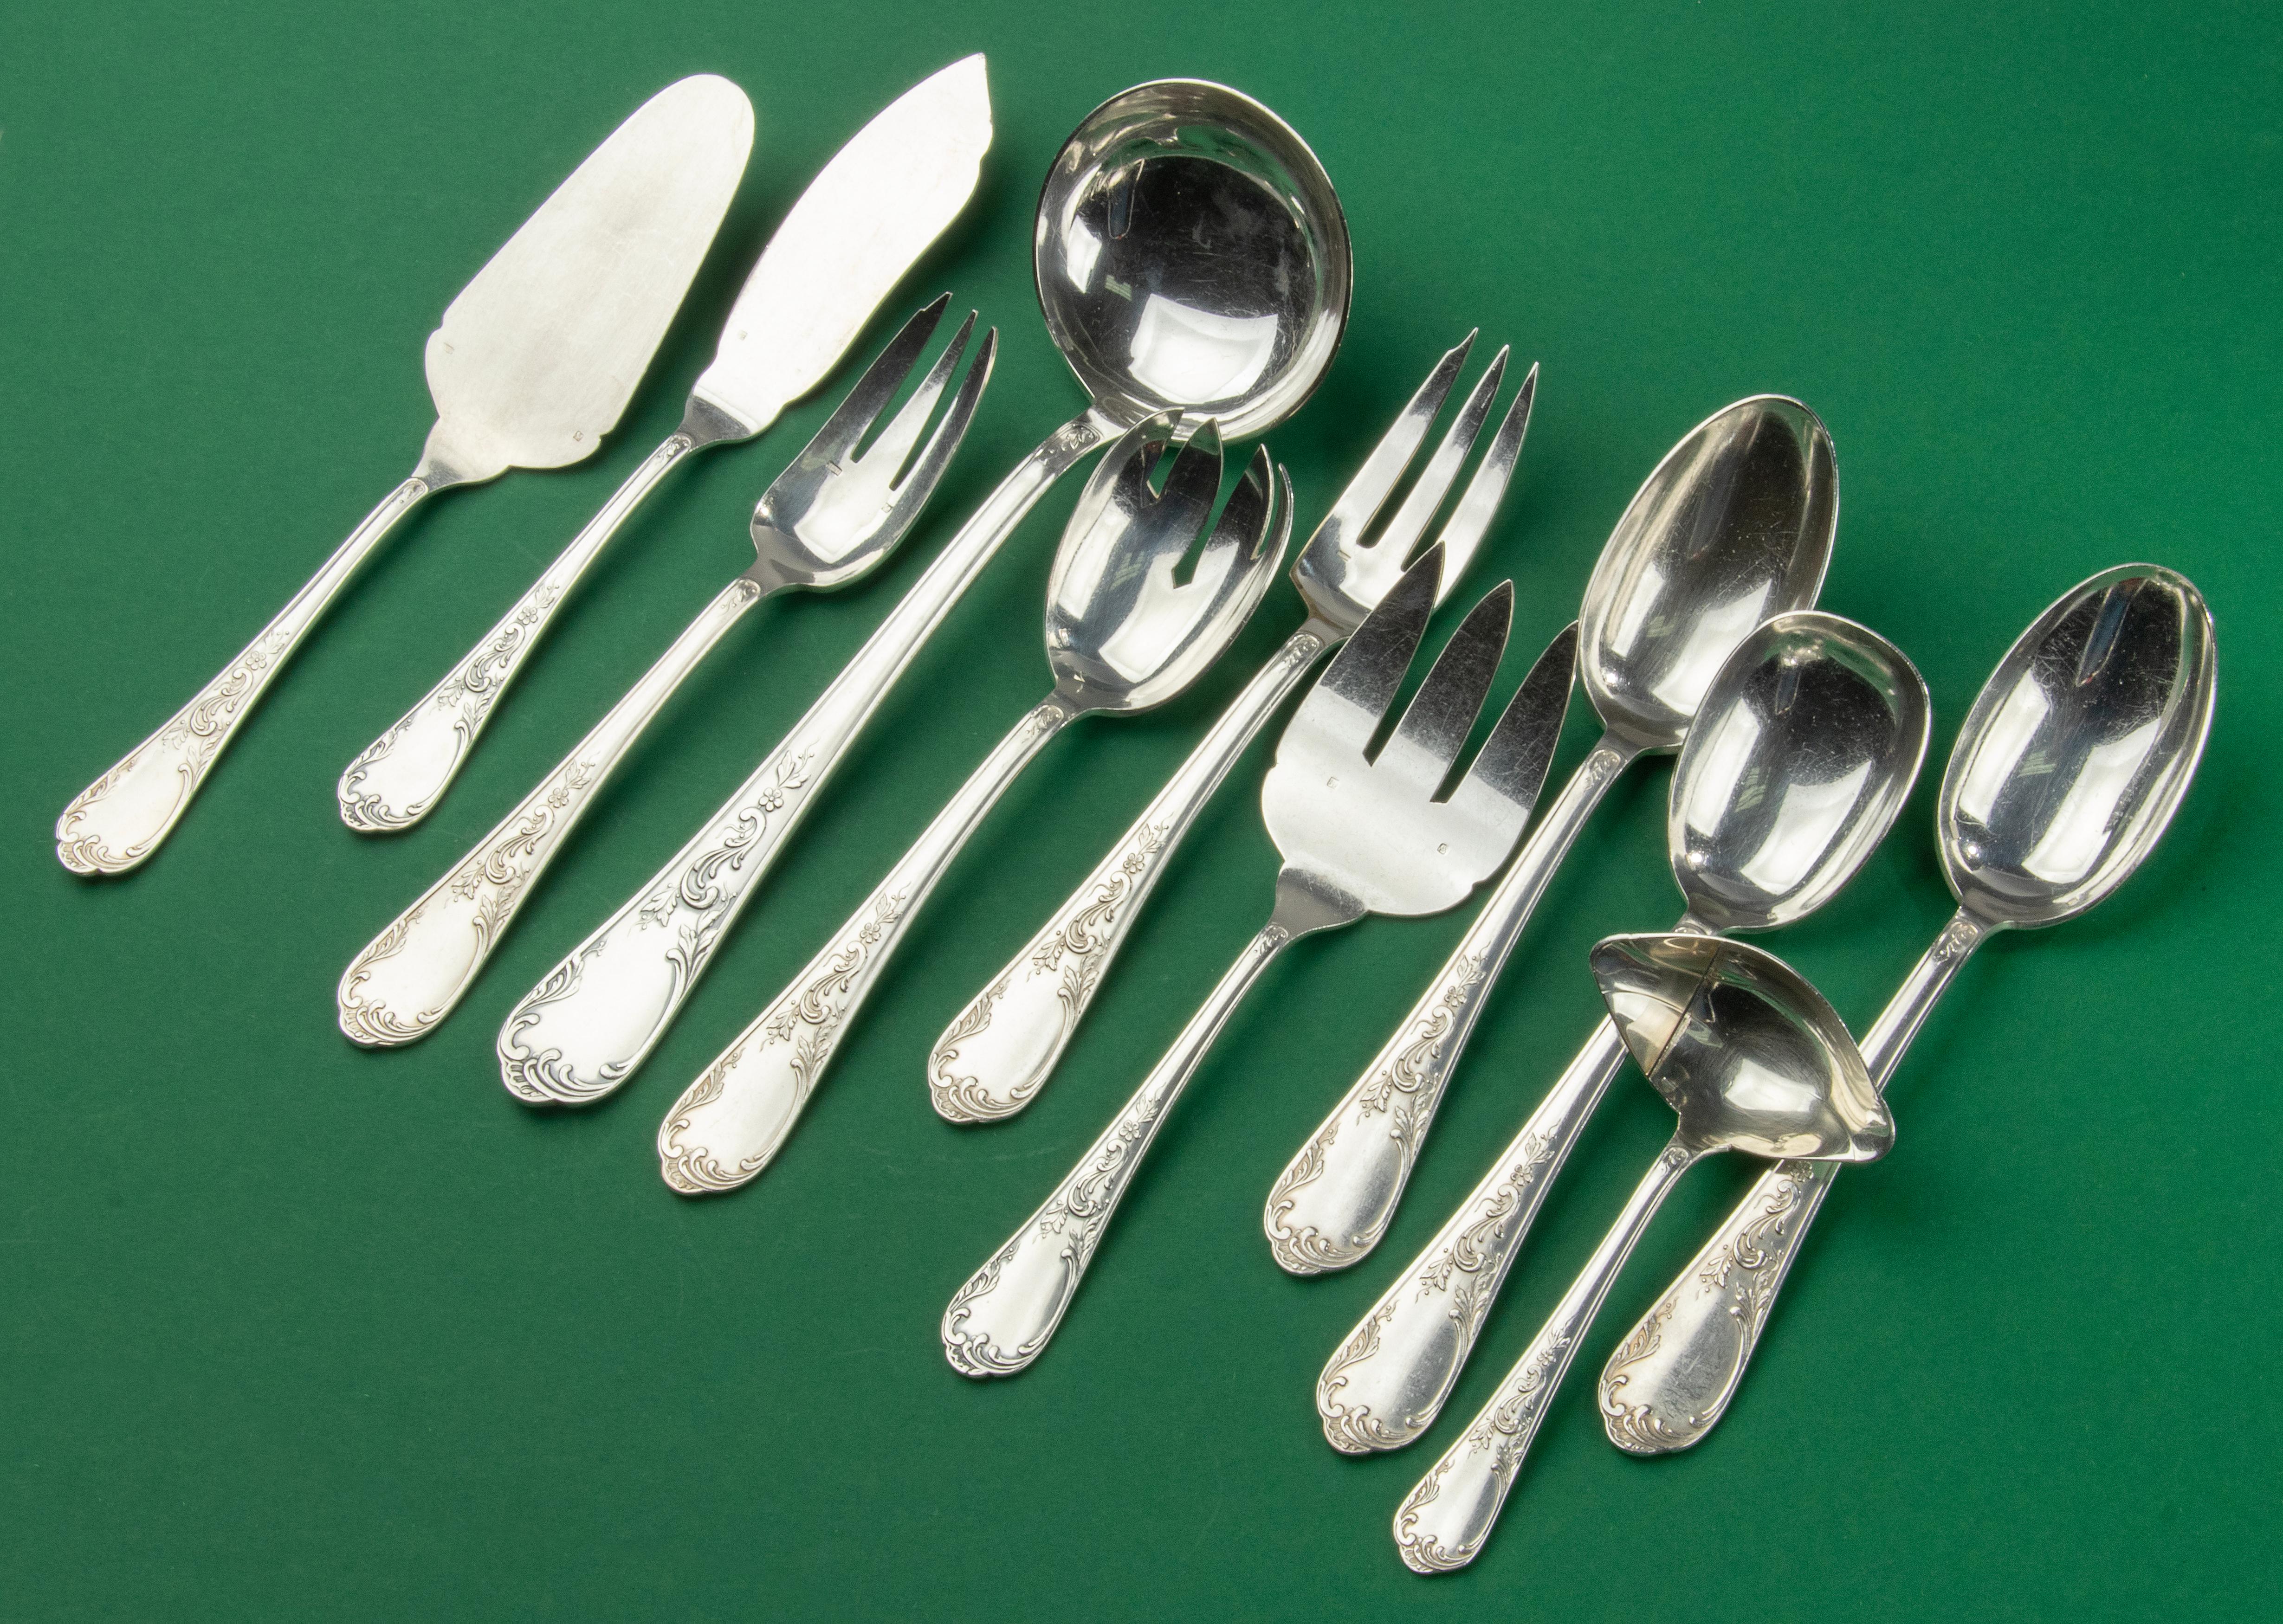 130-Piece Set Silver Plated Flatware, Frionnet France, Rococo Style For Sale 5